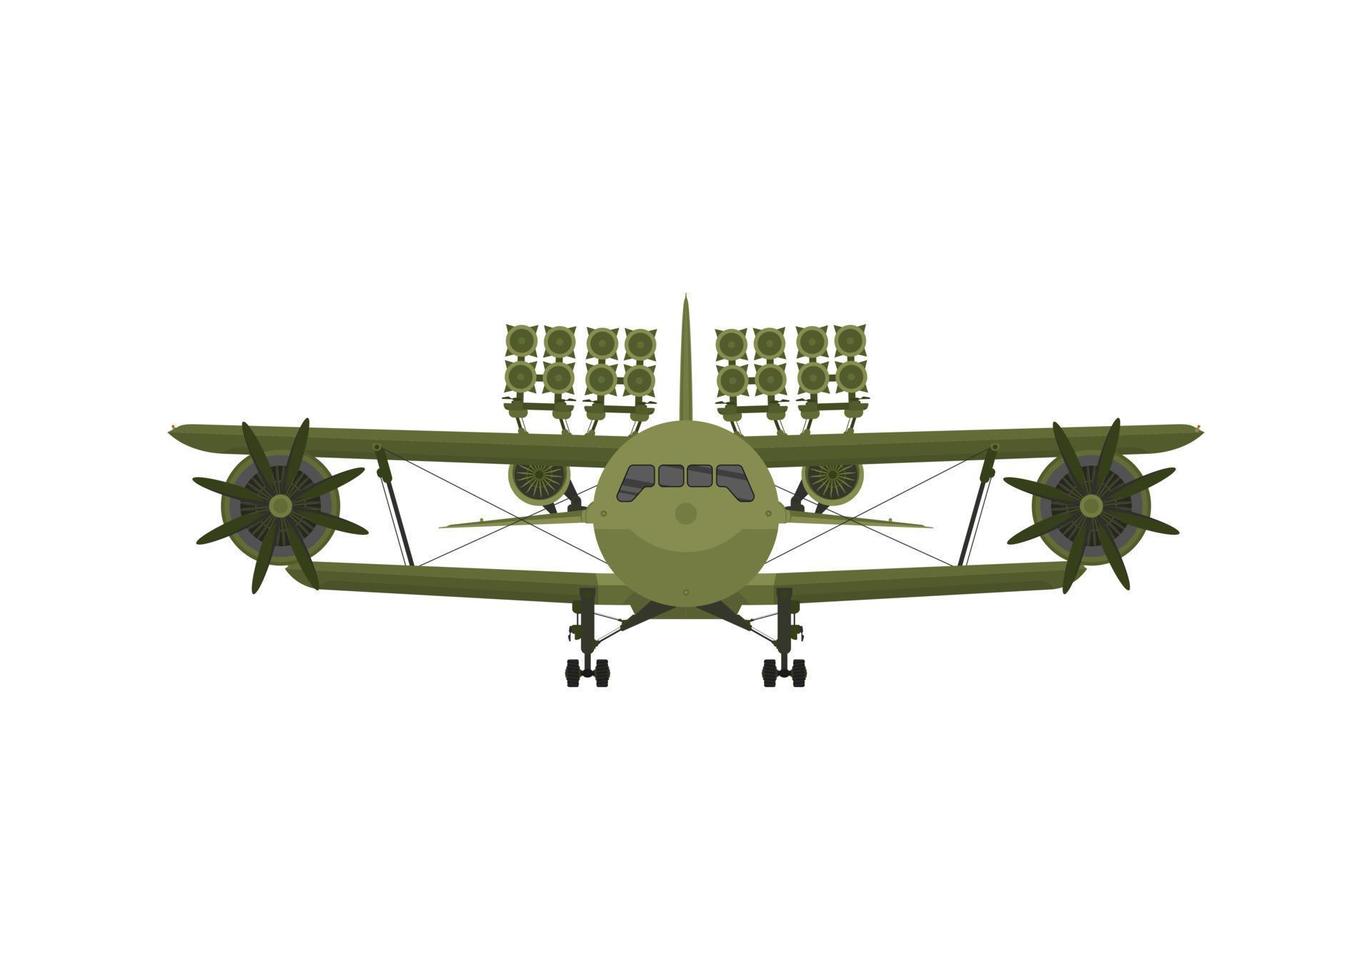 Fighter, military aircraft with missiles on board. Illustration isolated on white background. Vector